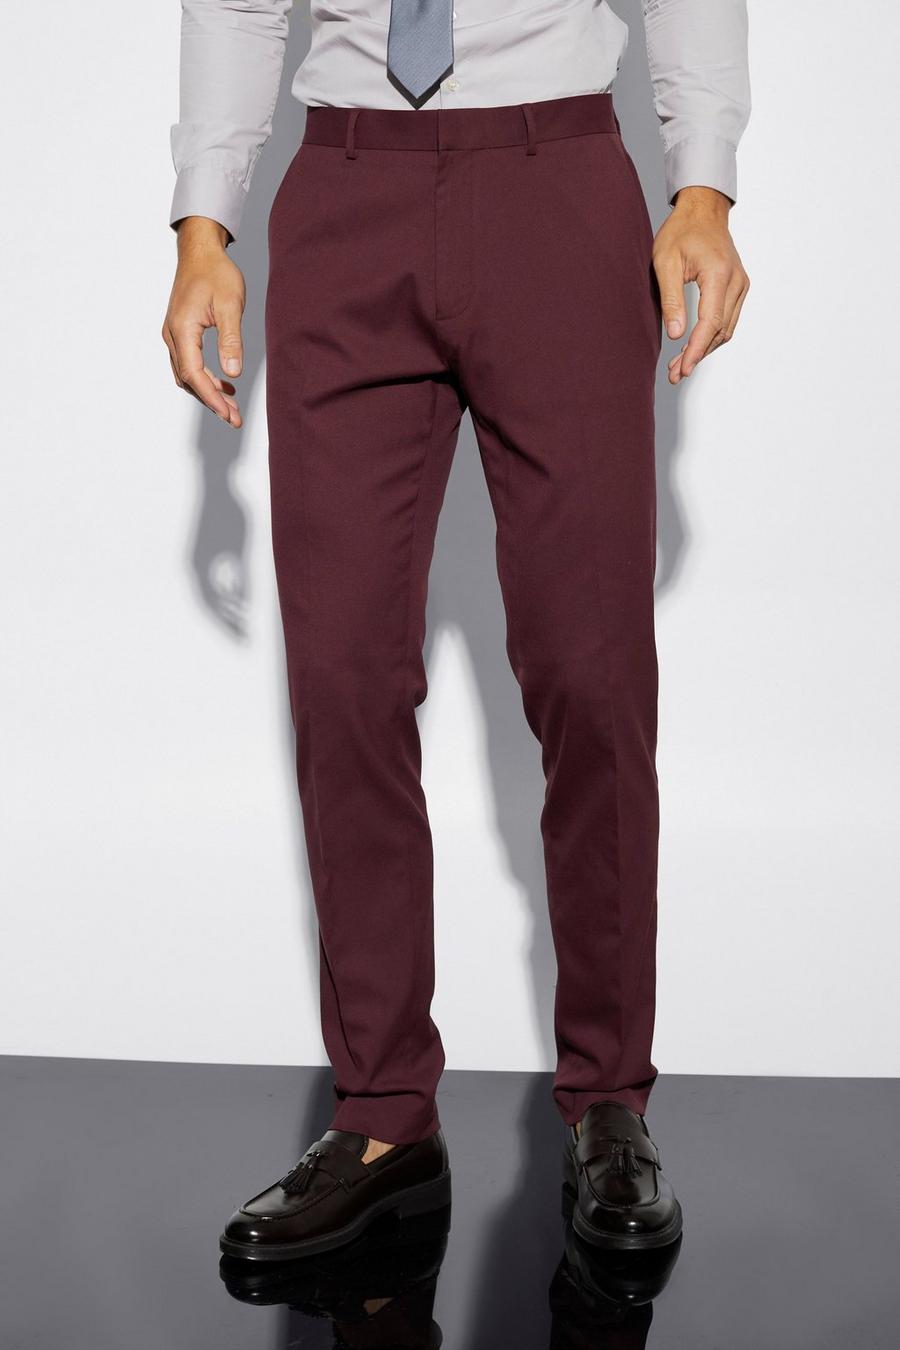 Burgundy Tall Slim Fit Tailored Trouser